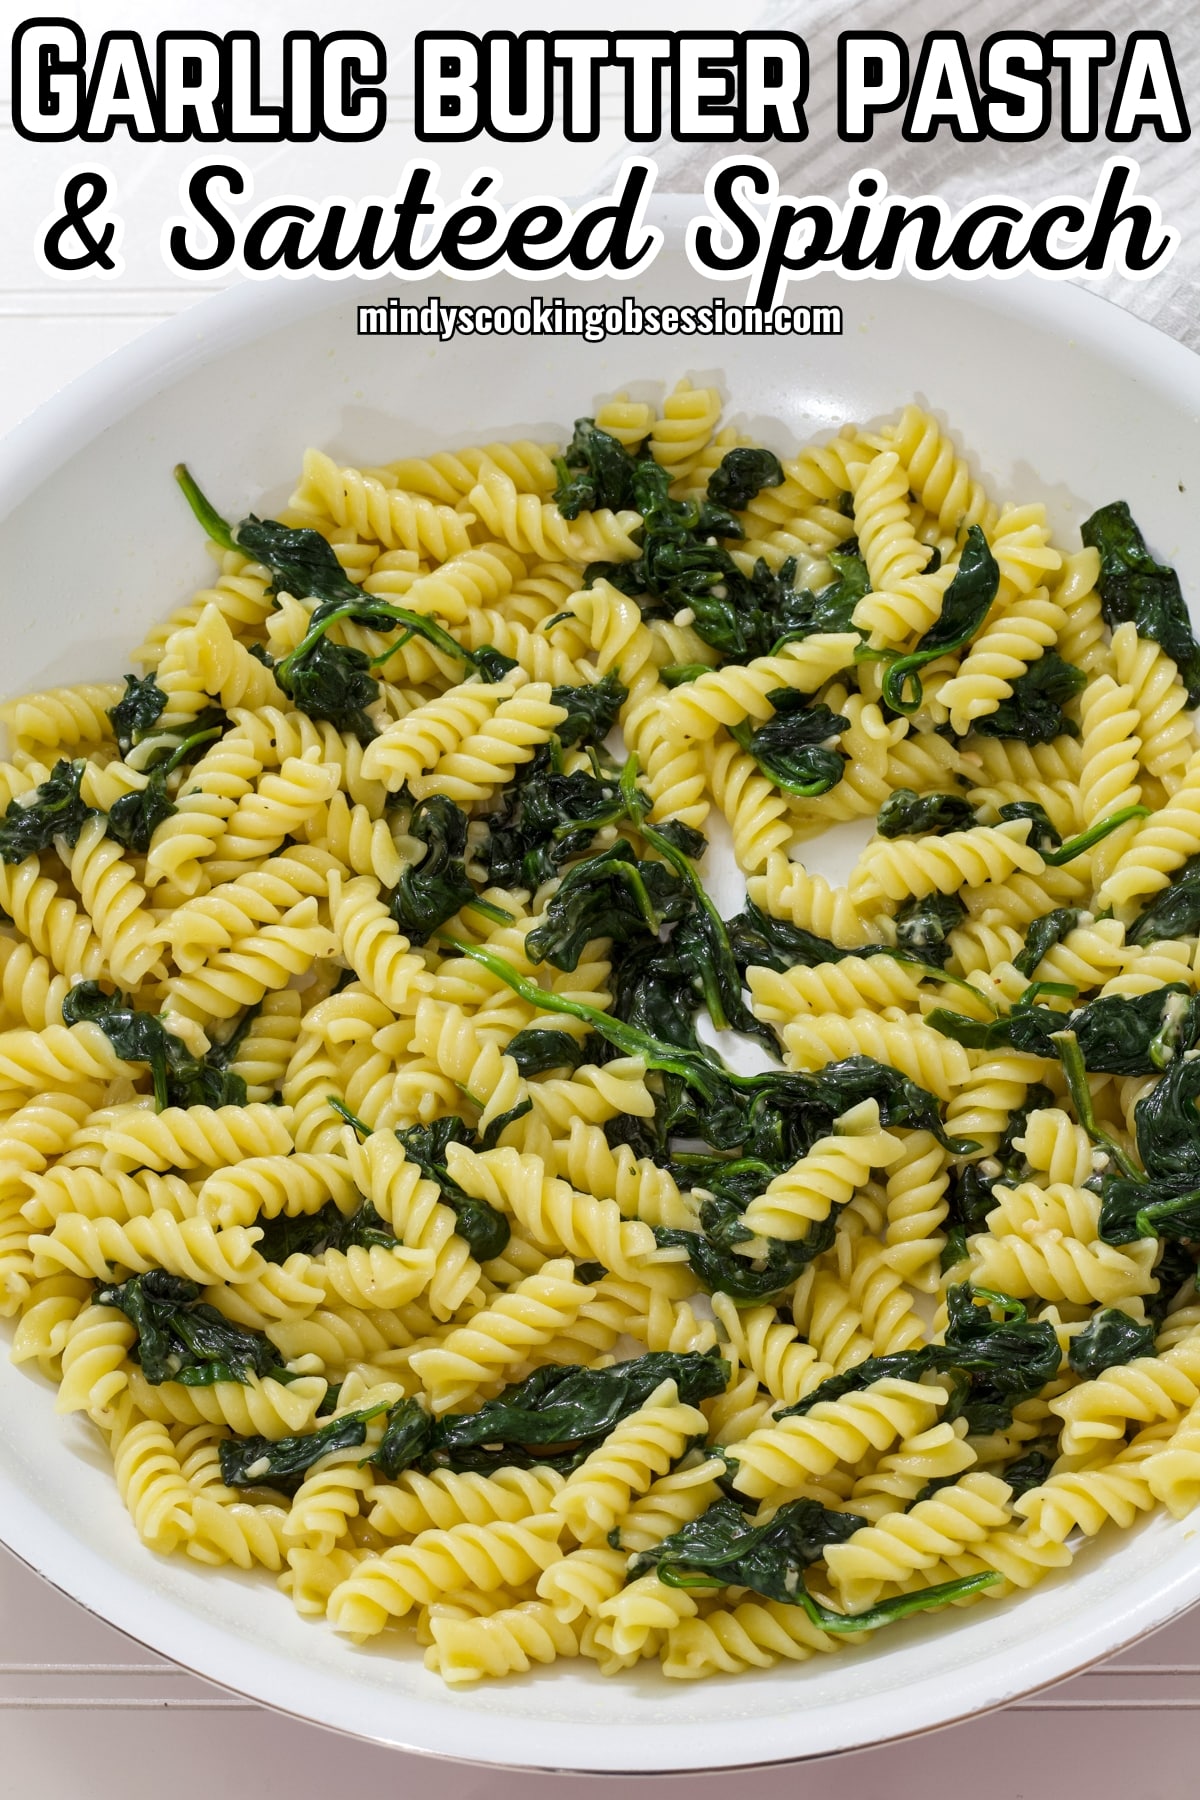 You are going to love this simple pasta dish because it is perfect for a quick and easy weeknight dinner. All you need is a handful of ingredients to make this easy spinach pasta recipe that is a great meatless meal or healthy and easy side dish. This versatile dish features tender pasta and fresh spinach tossed in an easy sauce made with a generous amount of Parmesan cheese, garlic, and milk. via @mindyscookingobsession